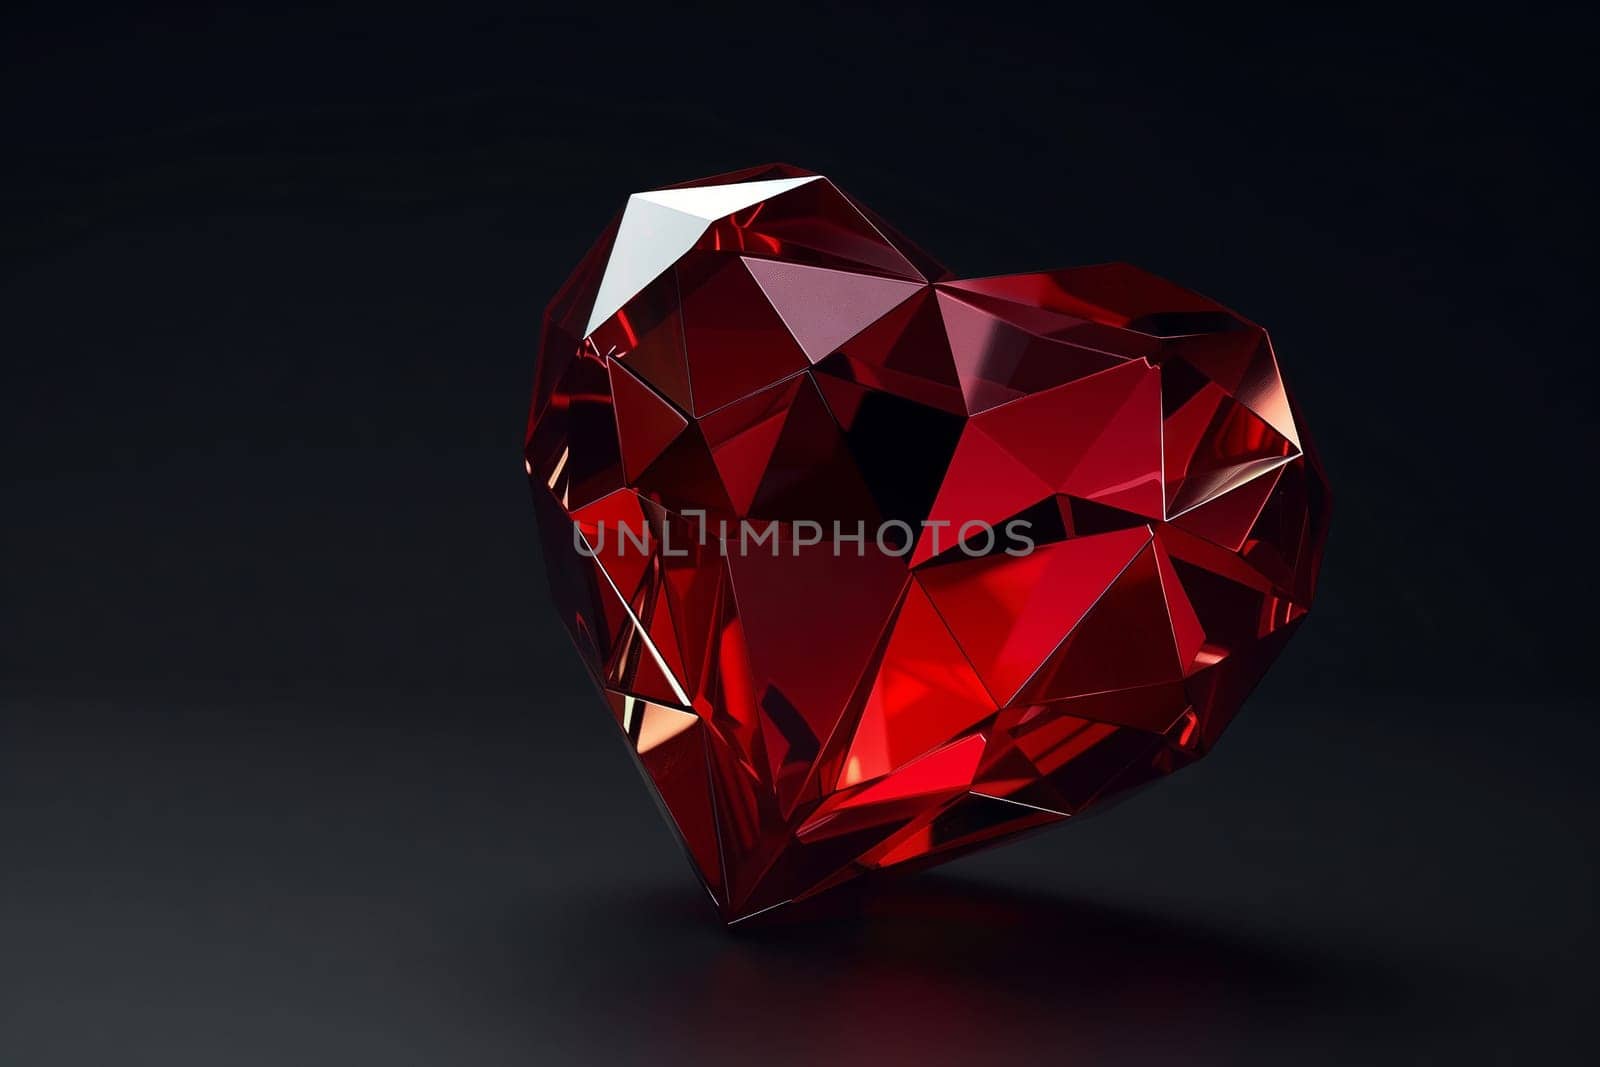 A magenta heartshaped diamond, a fashion accessory, rests on a black surface with a pattern of electric blue triangles. The art piece showcases symmetry and craft in its design